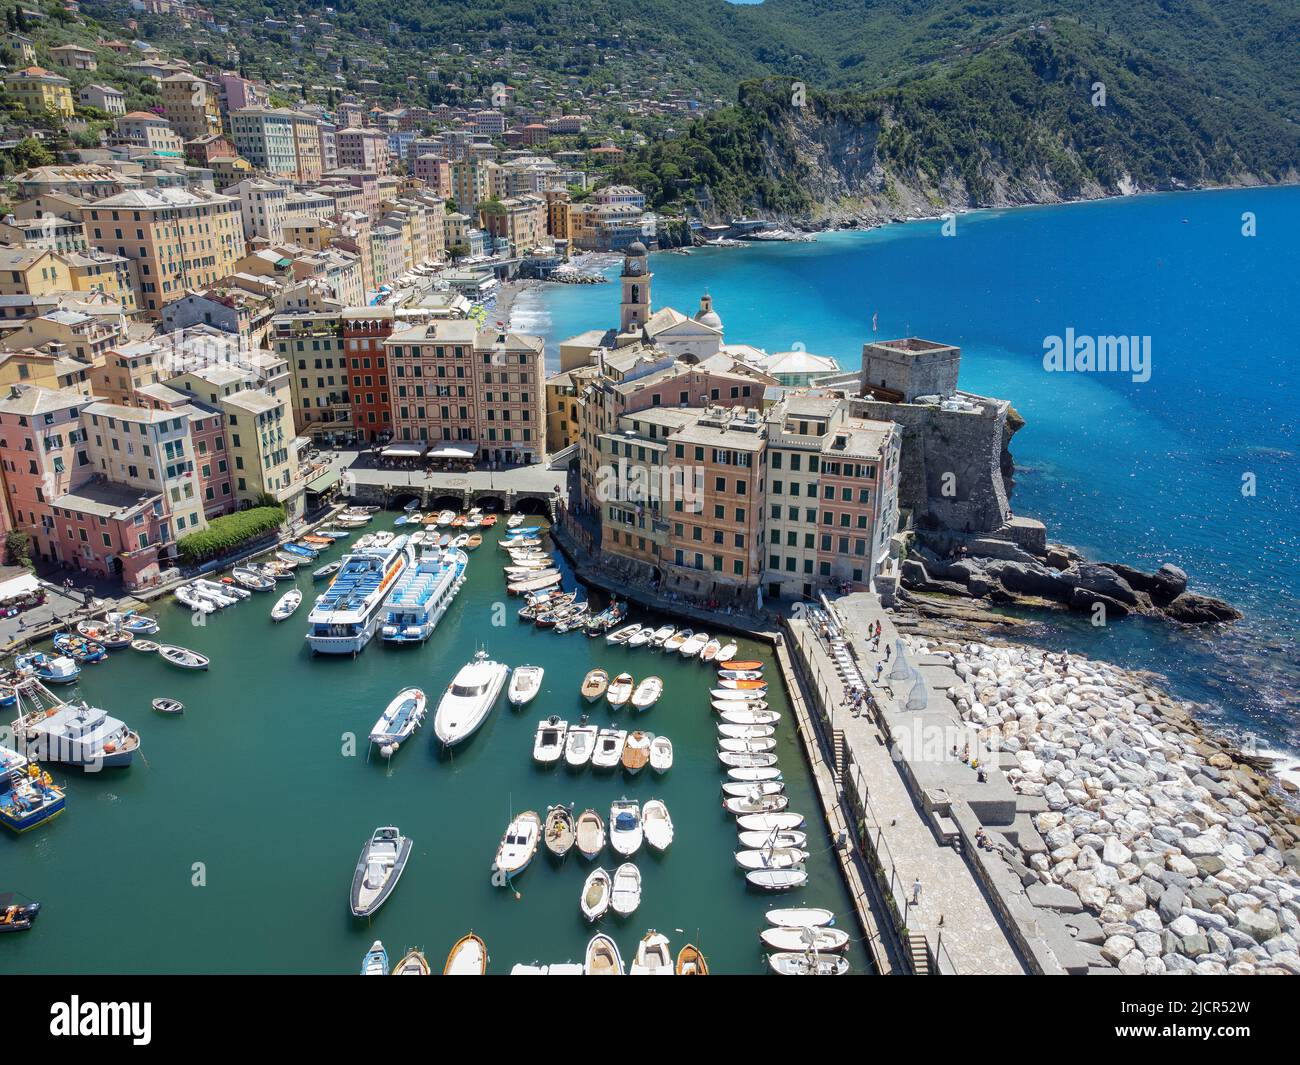 Camogli, Italy seen from above with sparkling blue water and beautiful buildings. Stock Photo